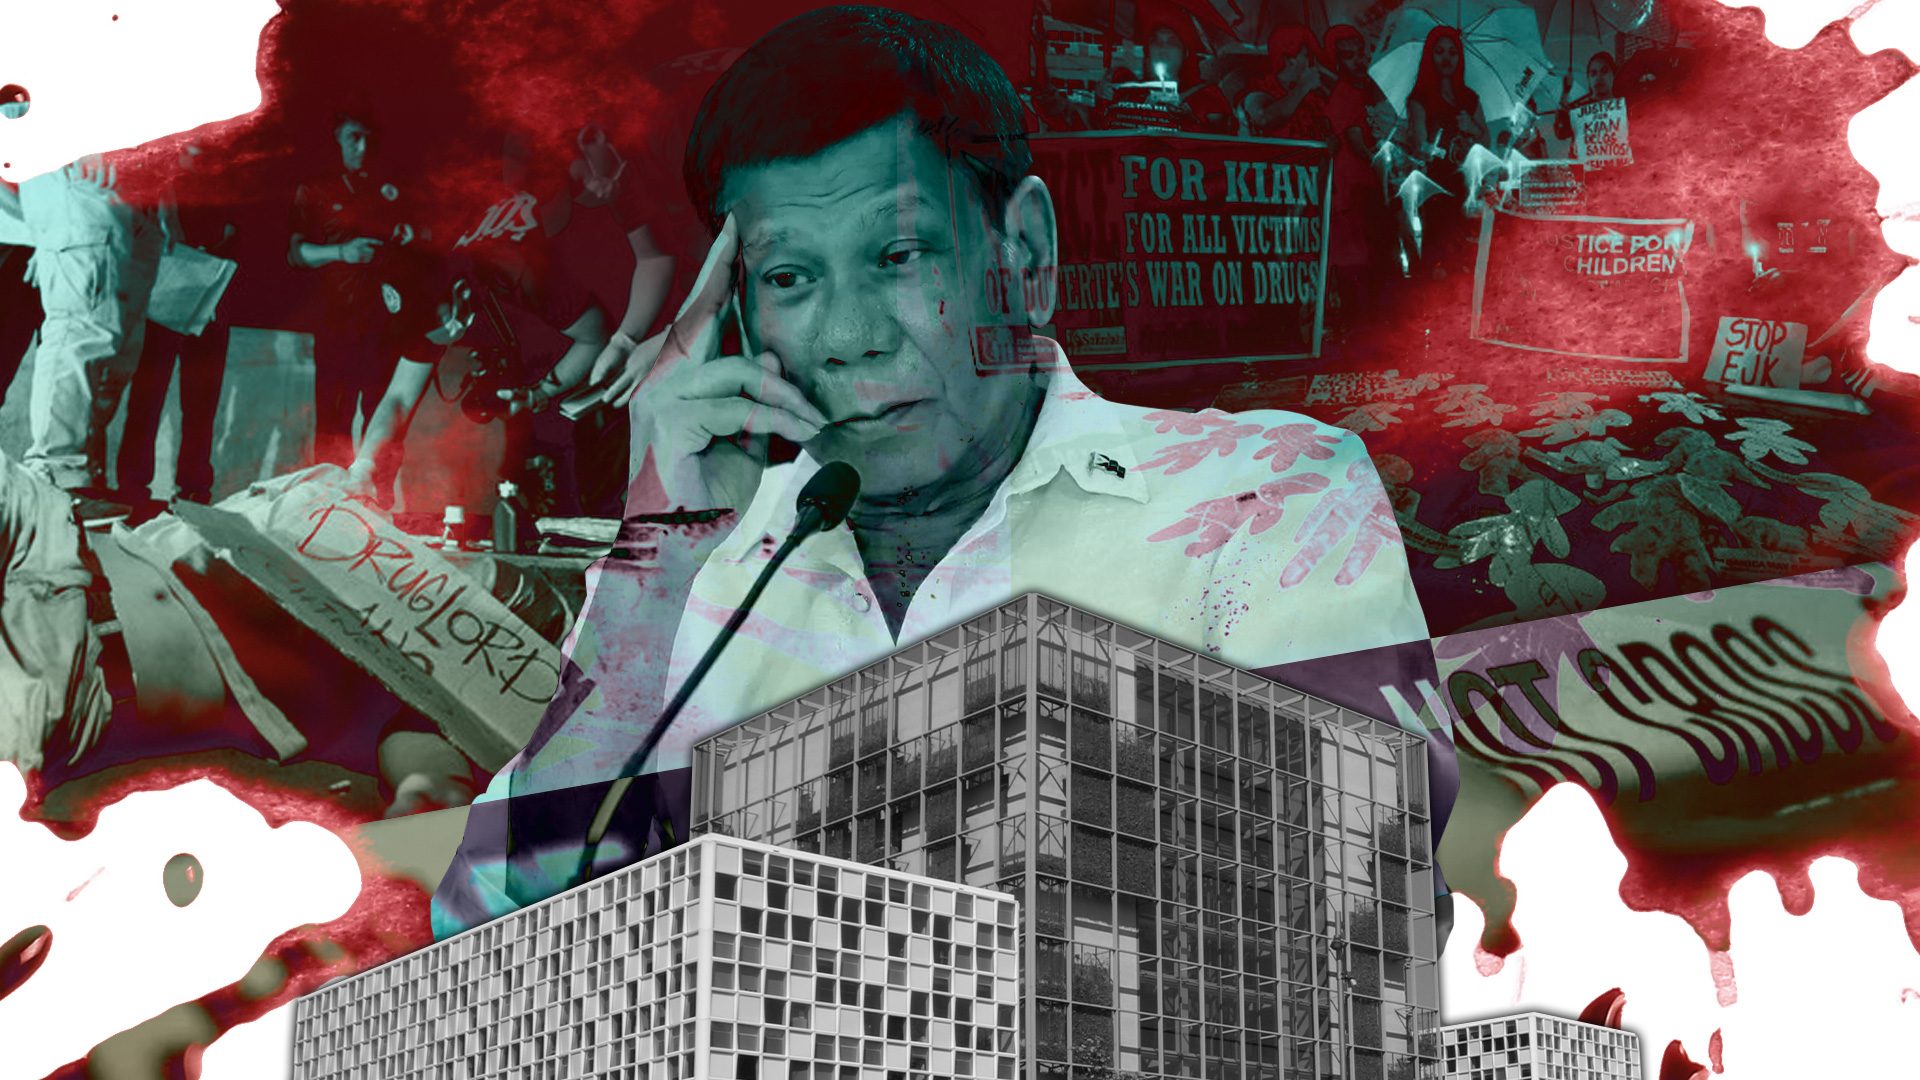 TIMELINE: The International Criminal Court and Duterte’s bloody war on drugs